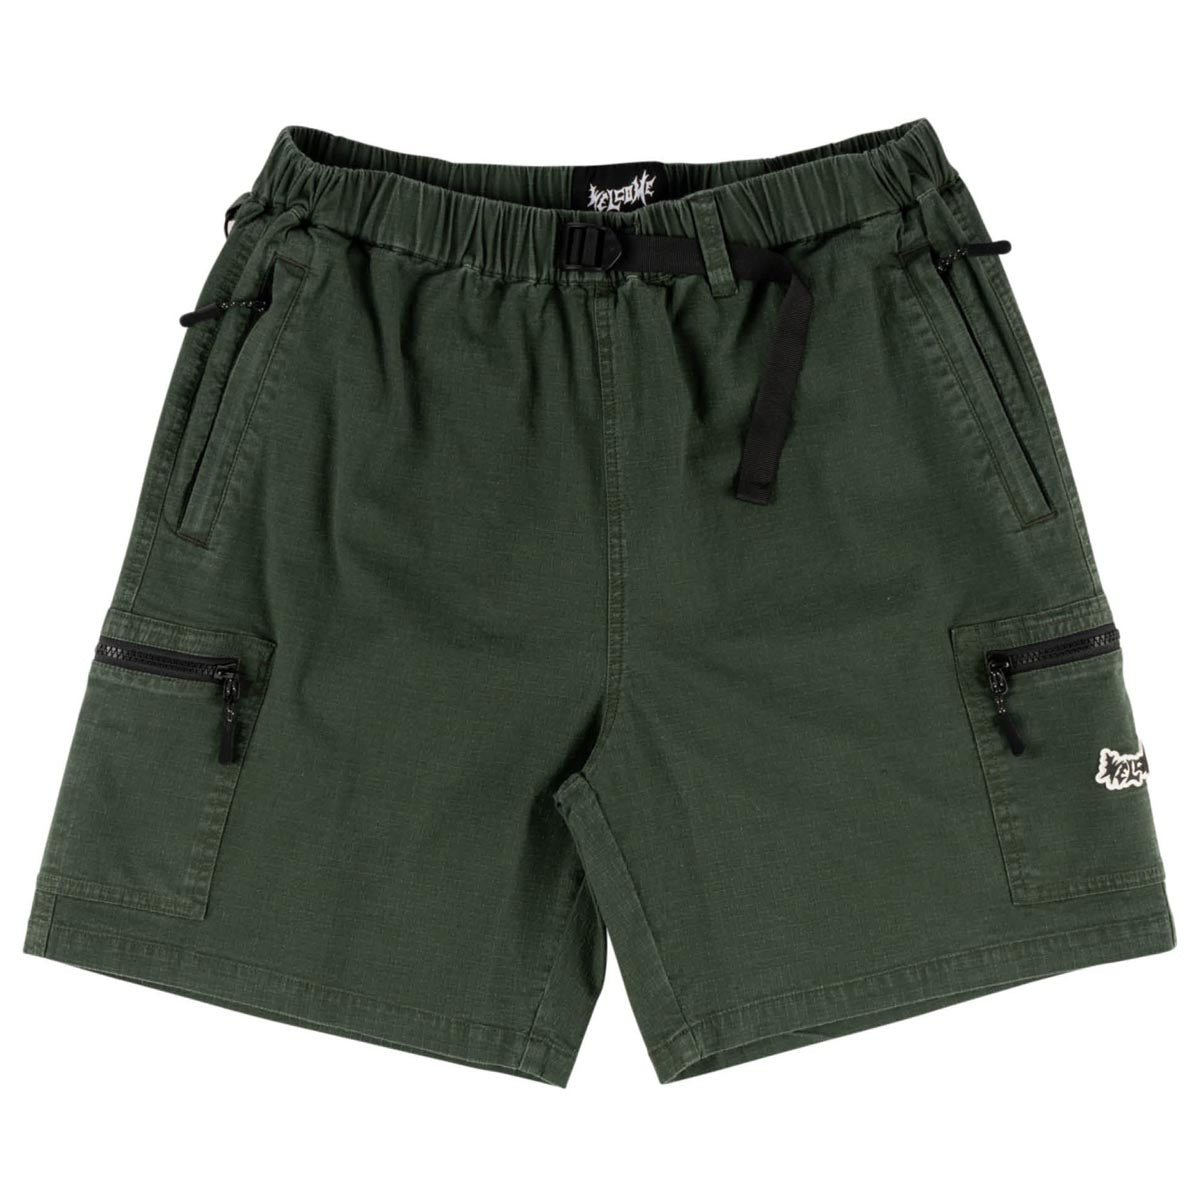 Welcome Summit Nylon Ripstop Shorts - Ivy image 1